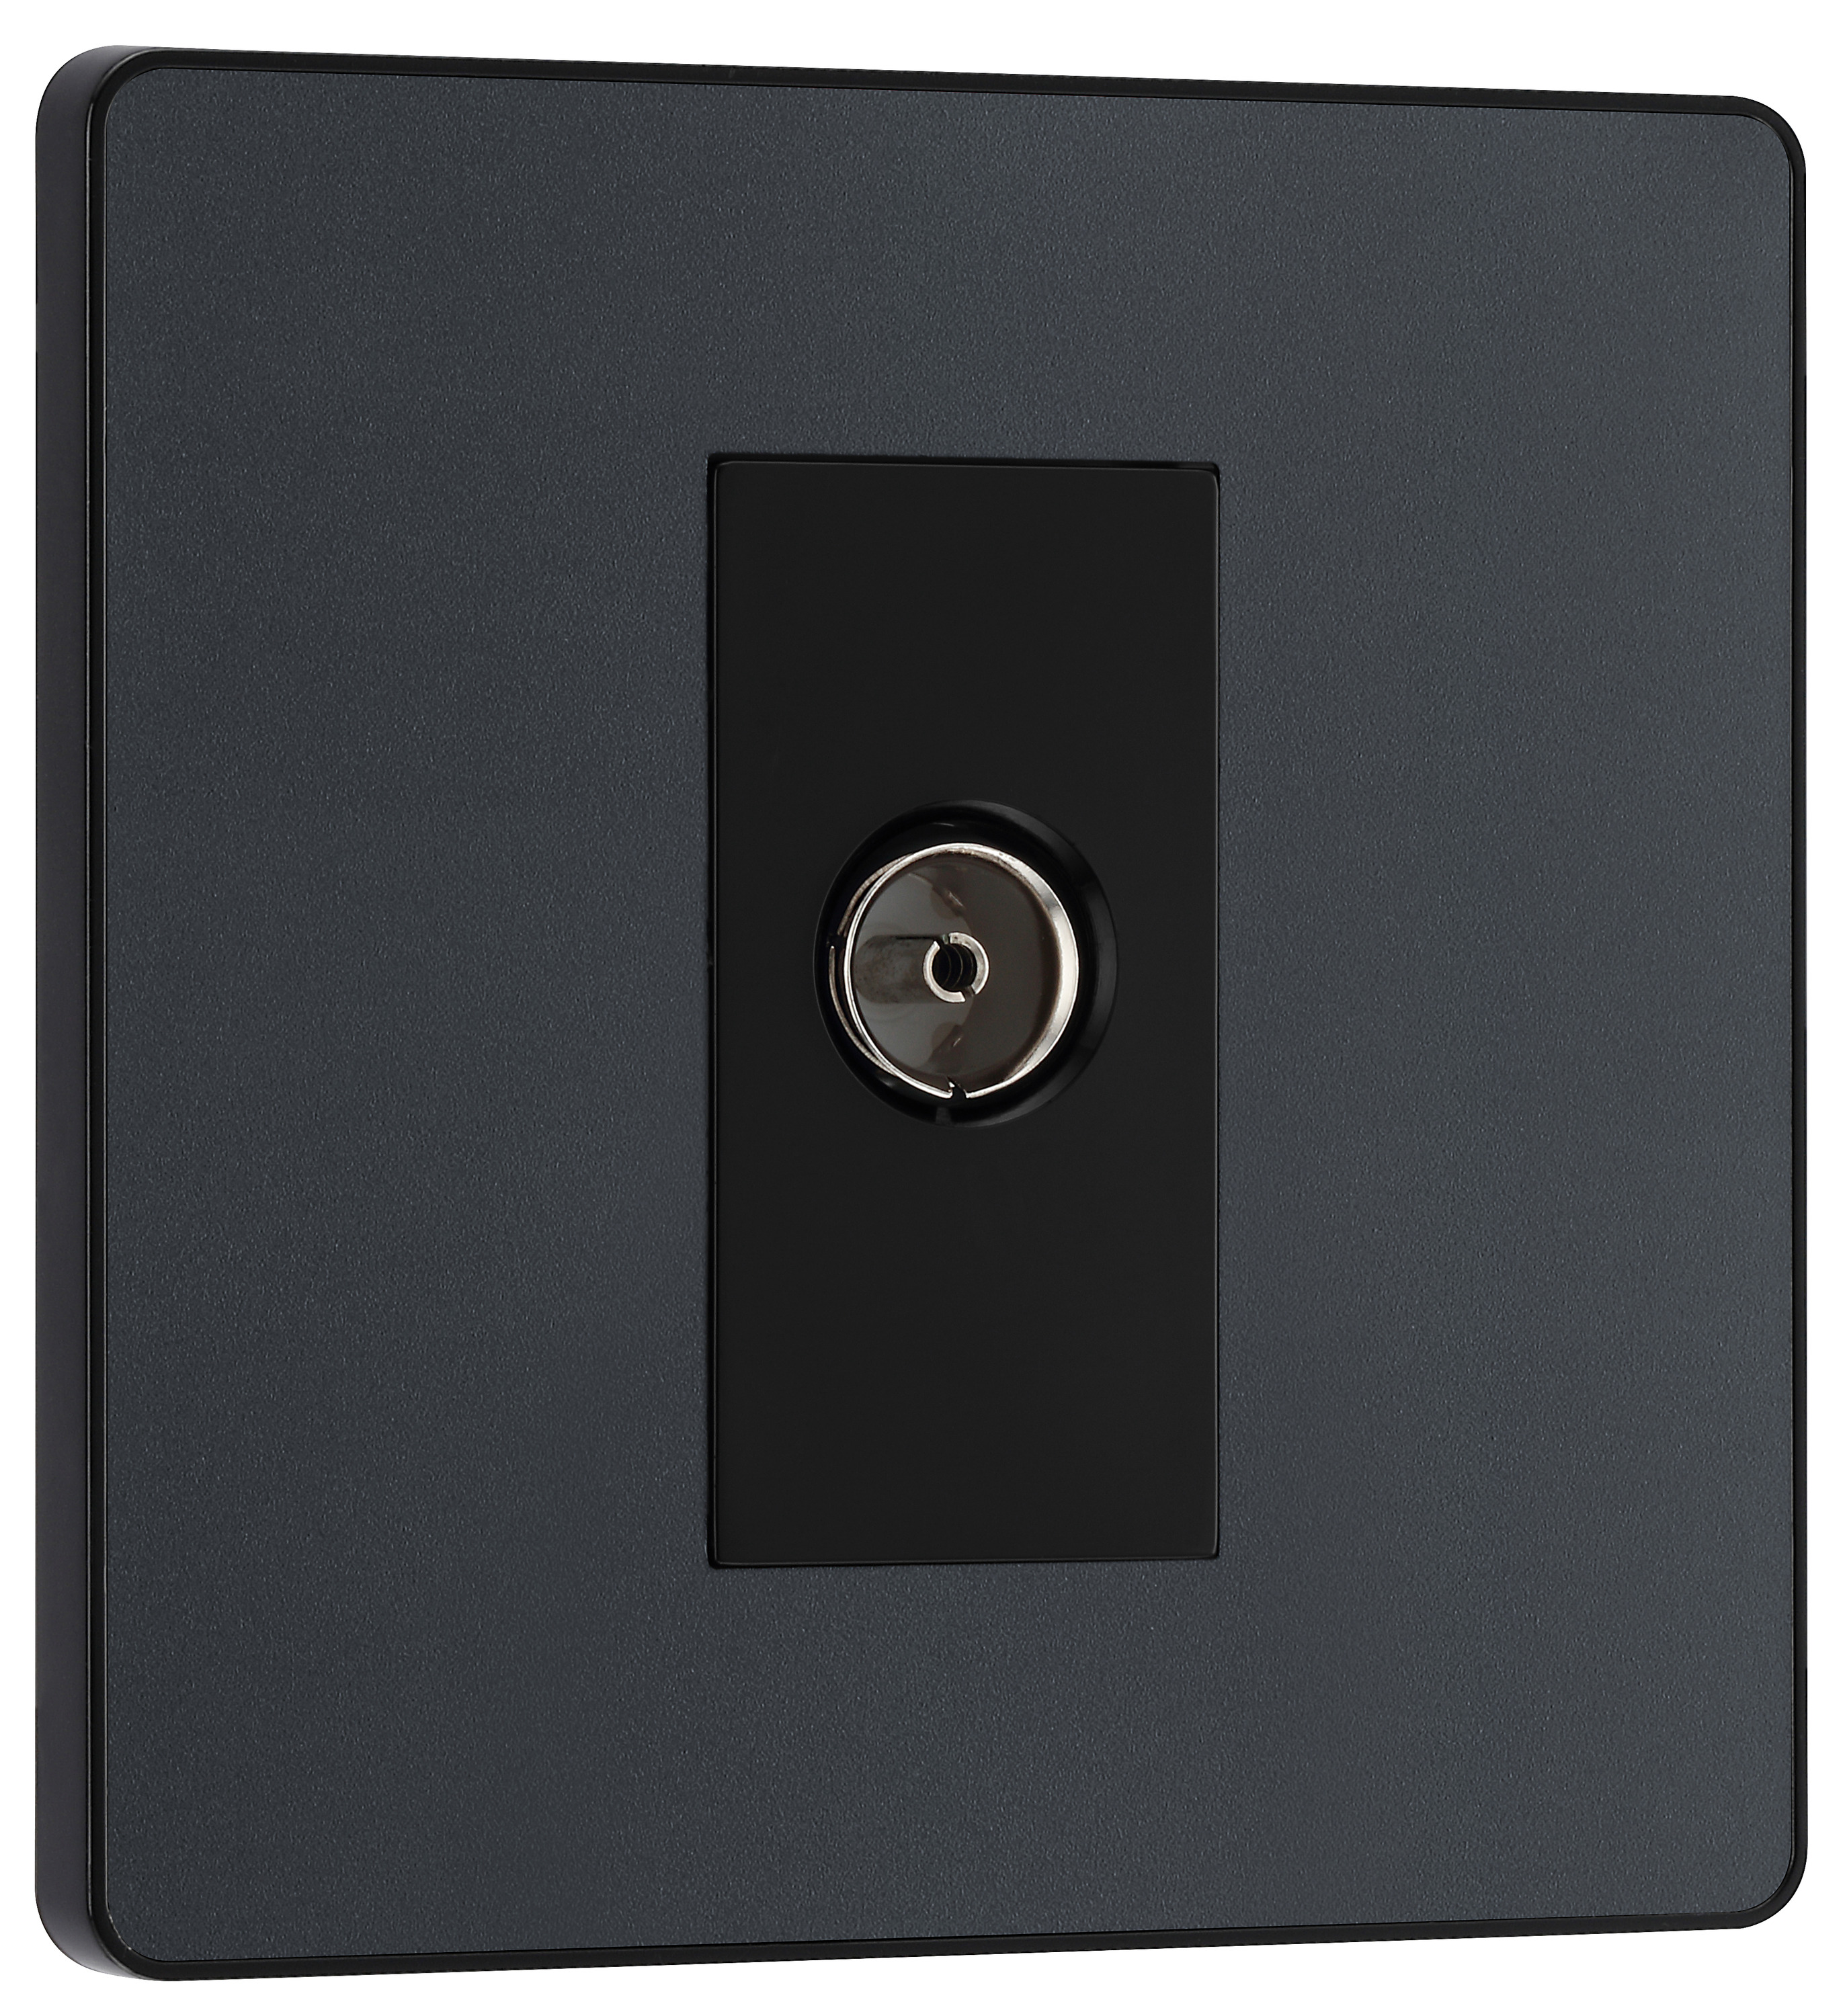 Image of BG Evolve Matt Grey Single Socket for TV or FM Co-Axial Aerial Connection